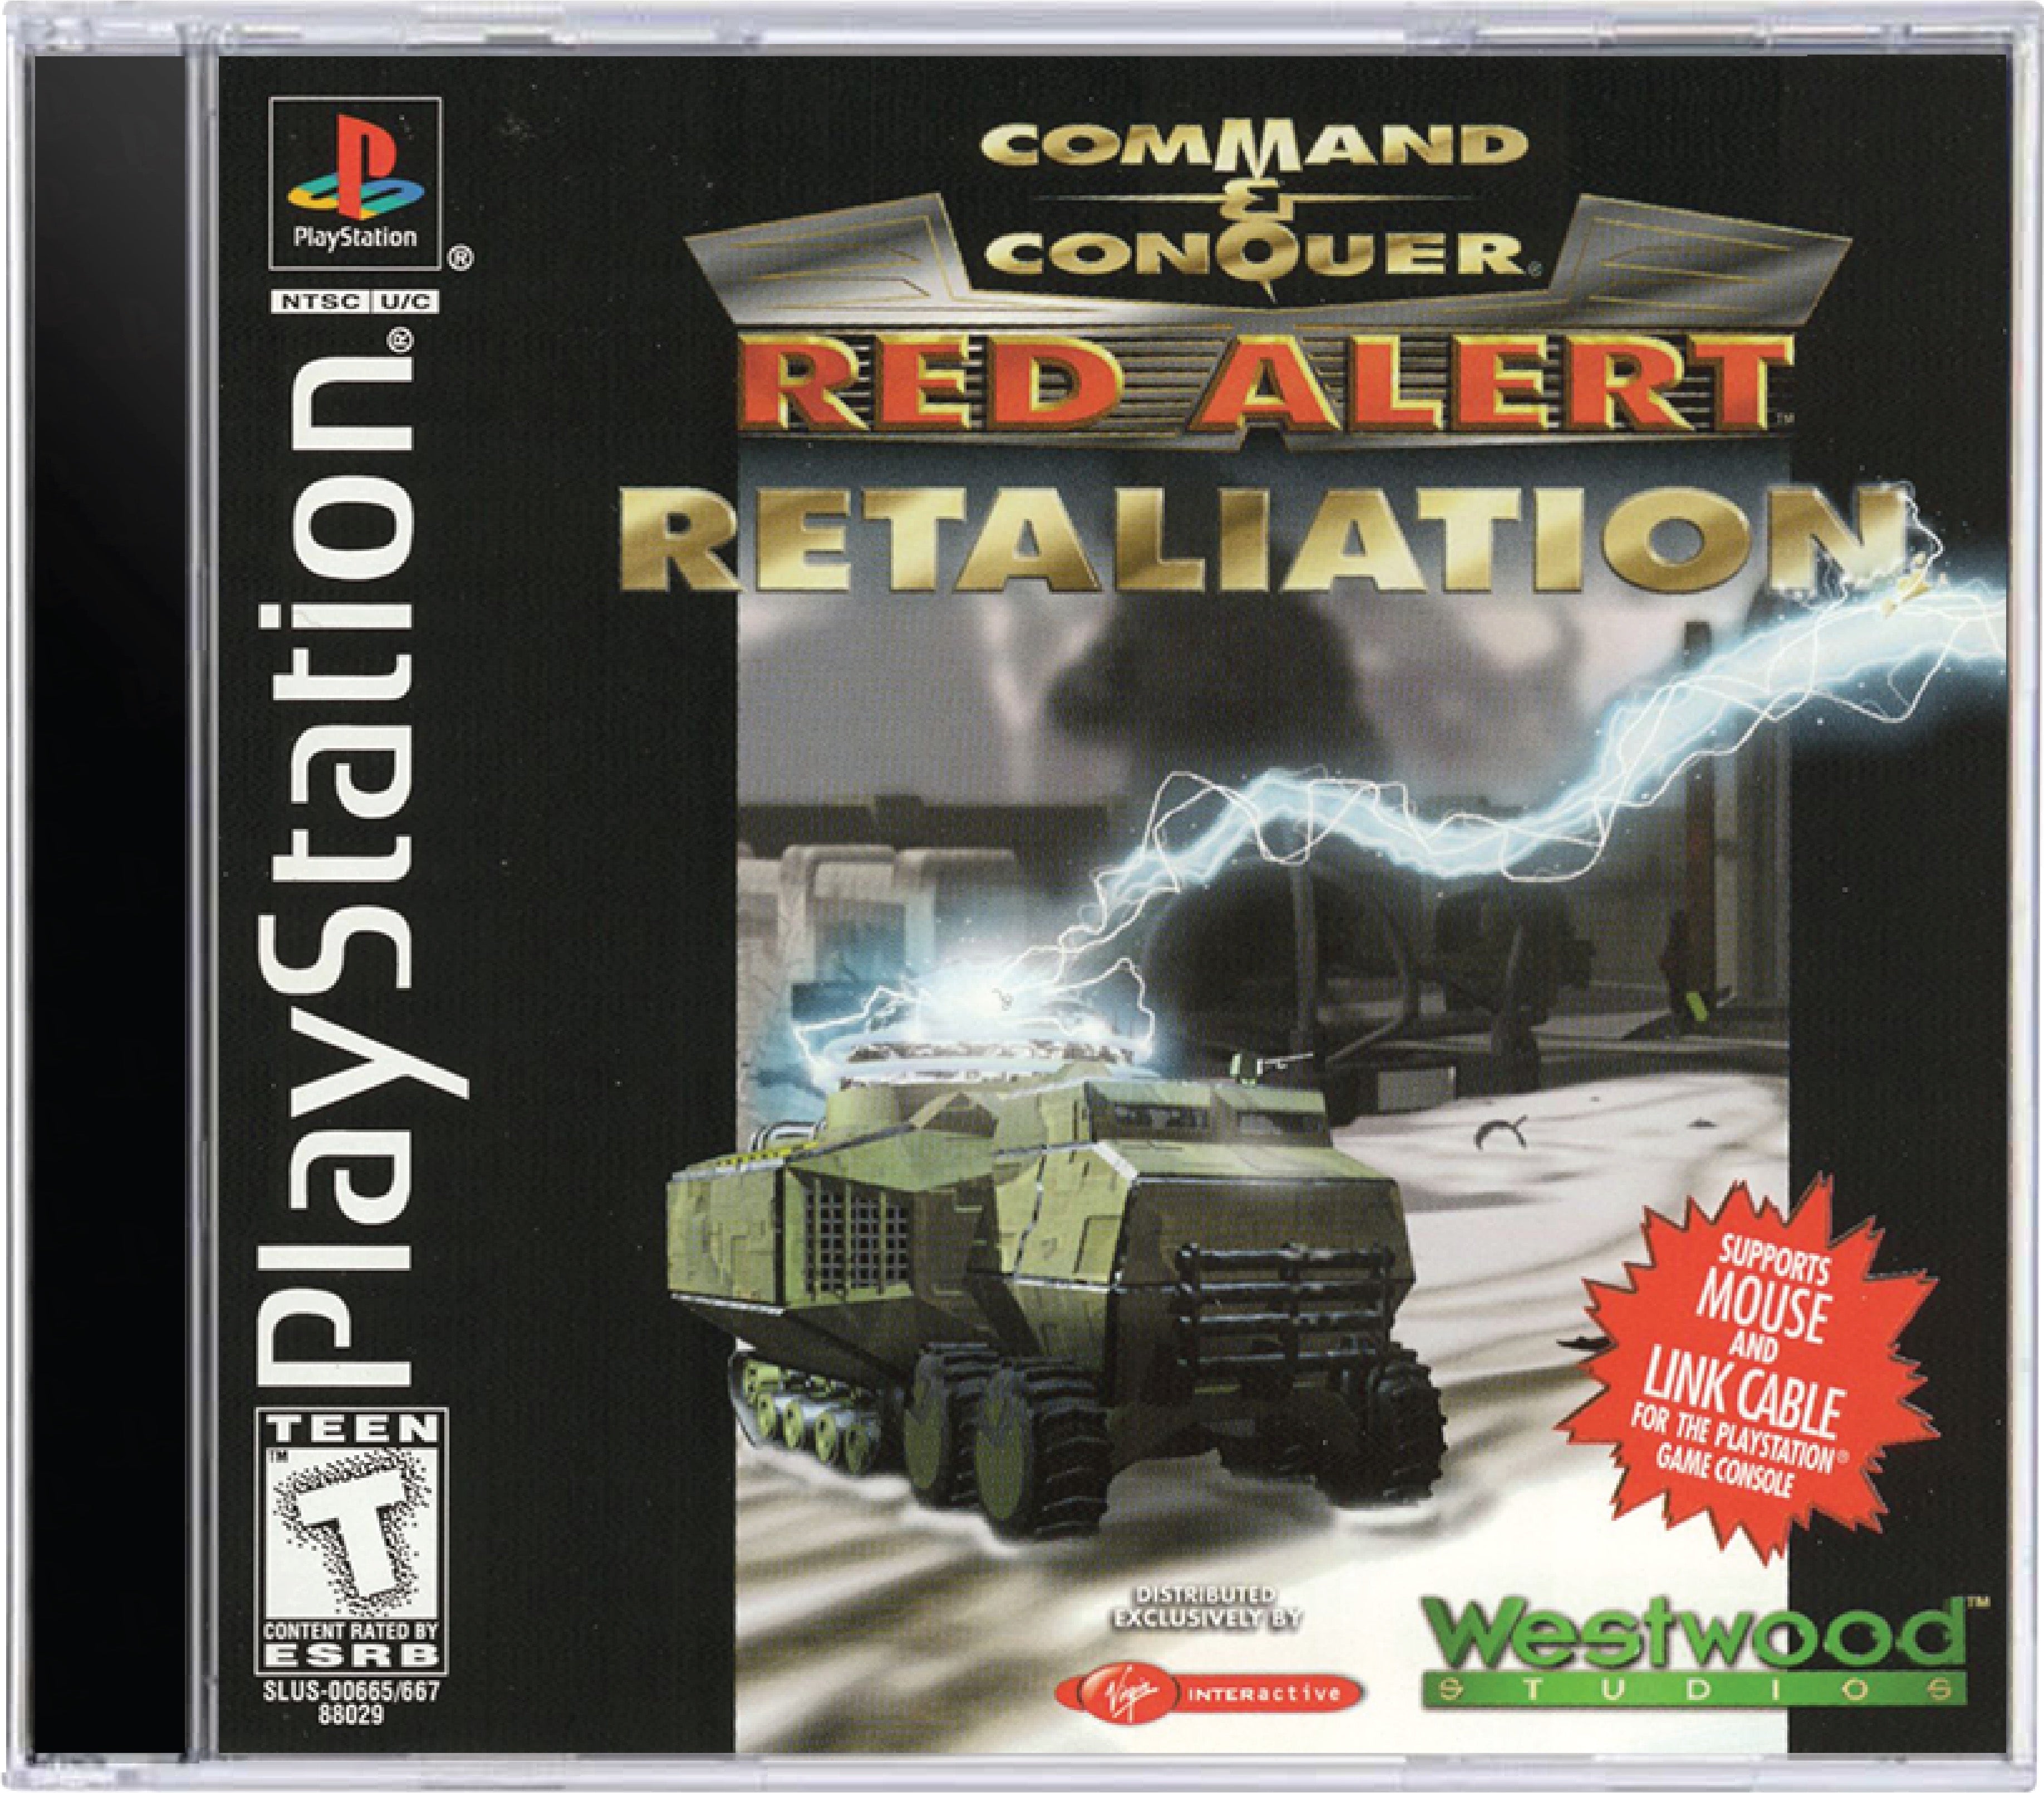 Command and Conquer Red Alert Retaliation Cover Art and Product Photo